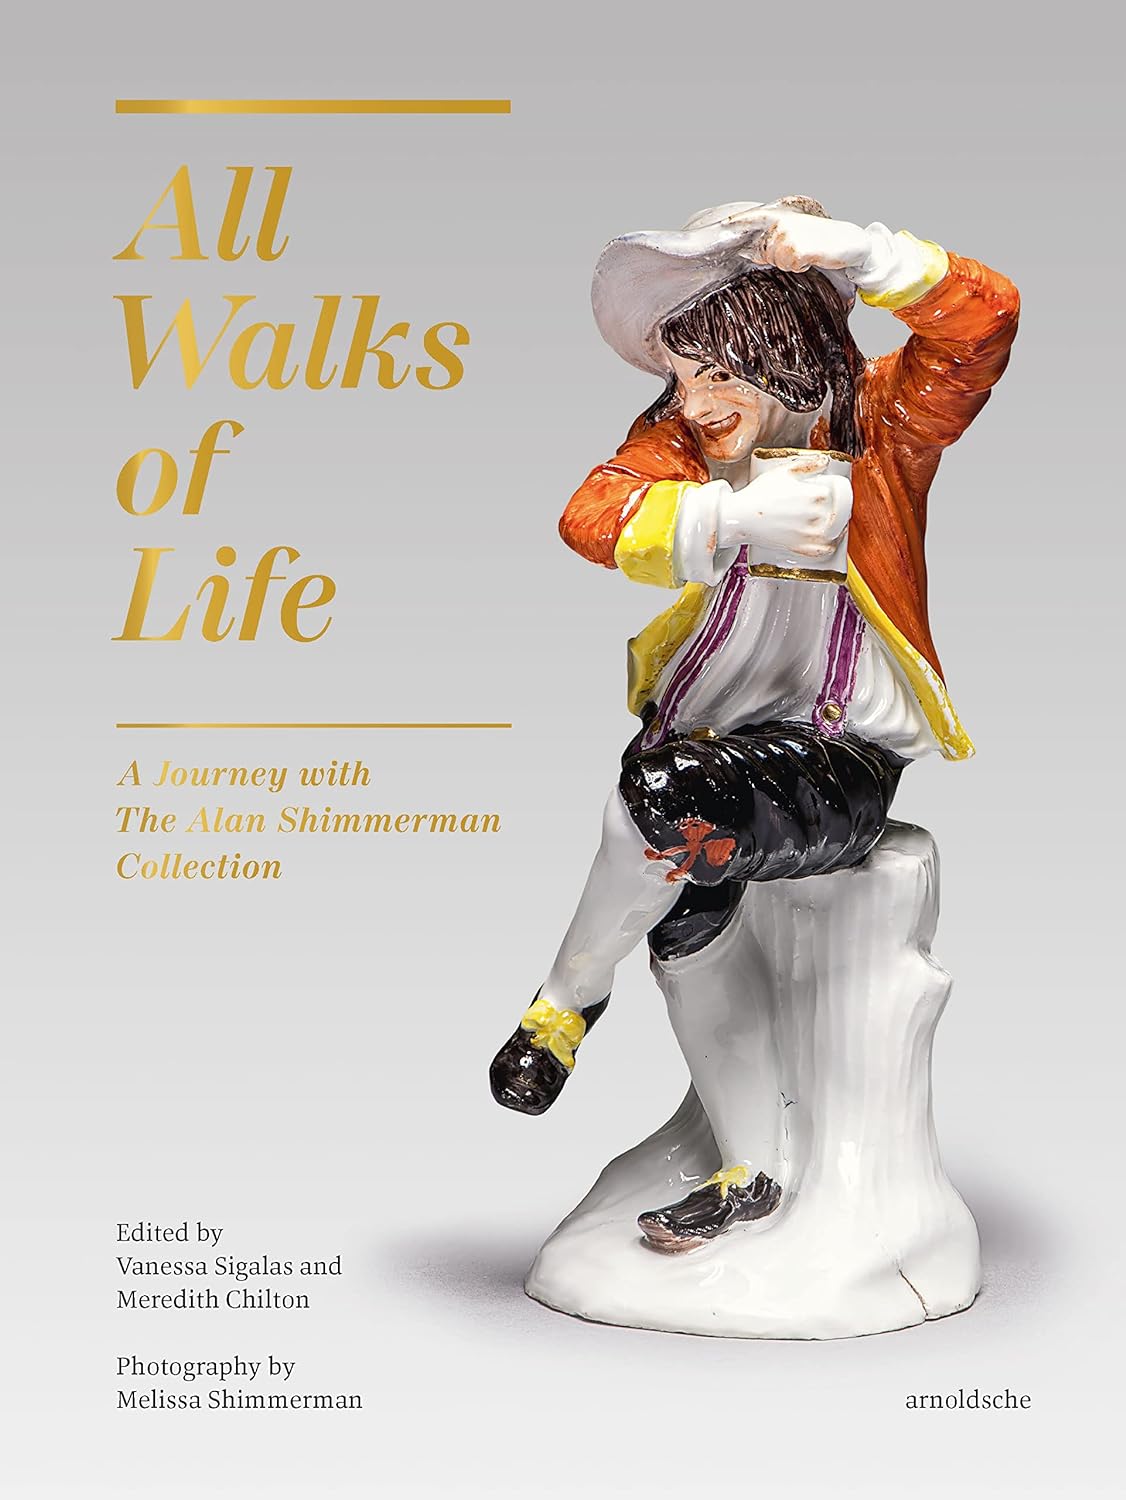 All Walks of Life: A Journey with The Alan Shimmerman Collection: Meissen Porcelain Figures of the Eighteenth Century